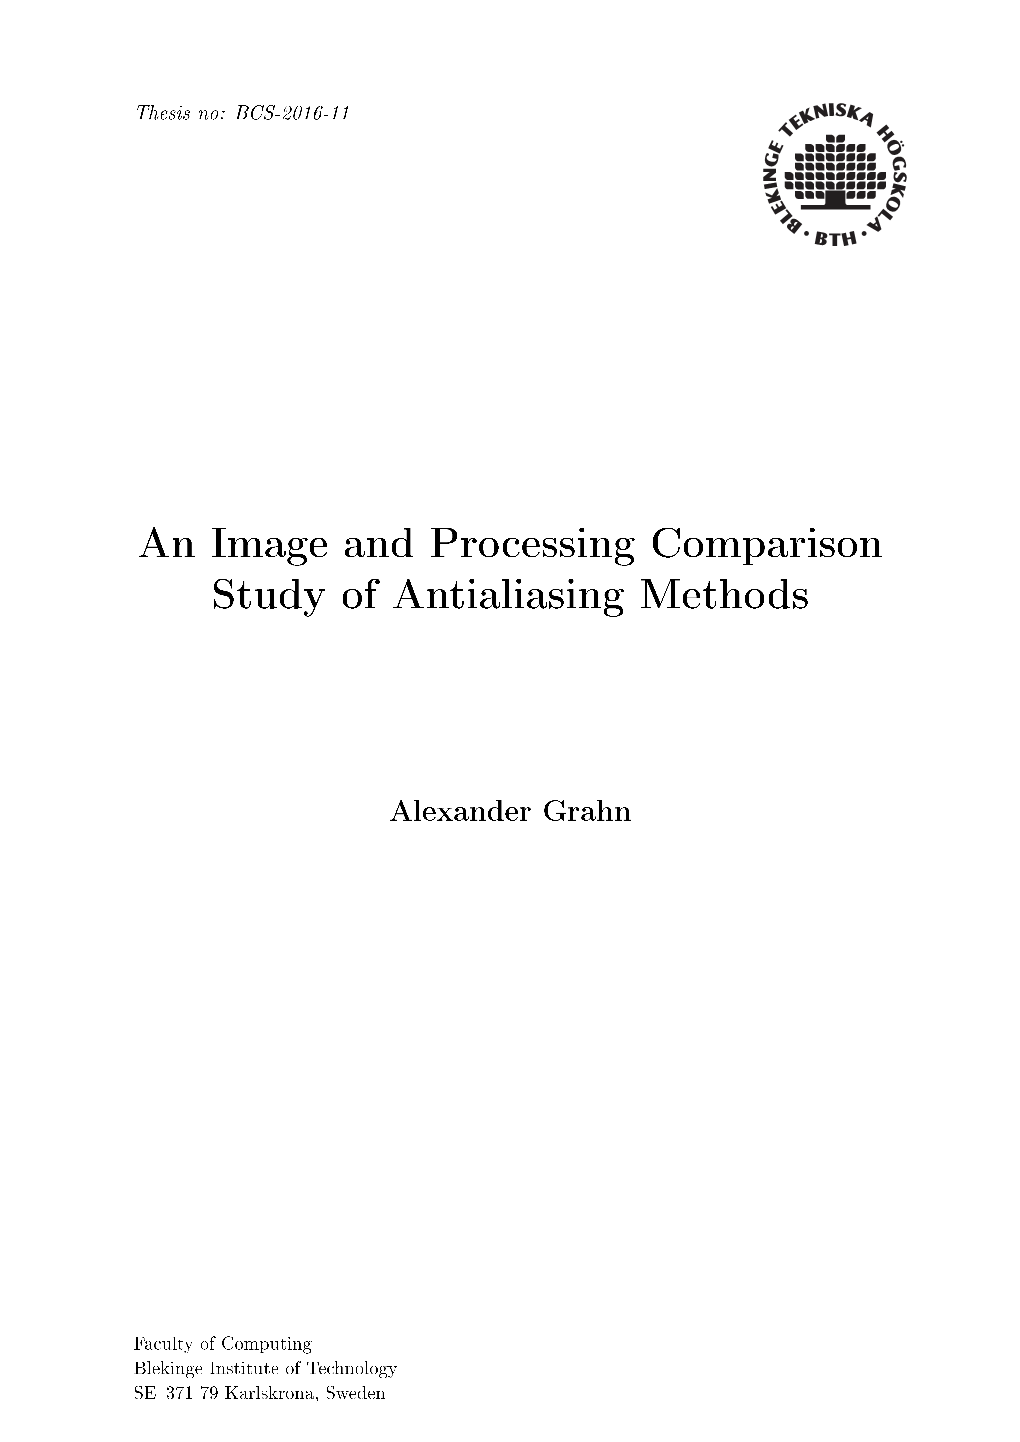 An Image and Processing Comparison Study of Antialiasing Methods